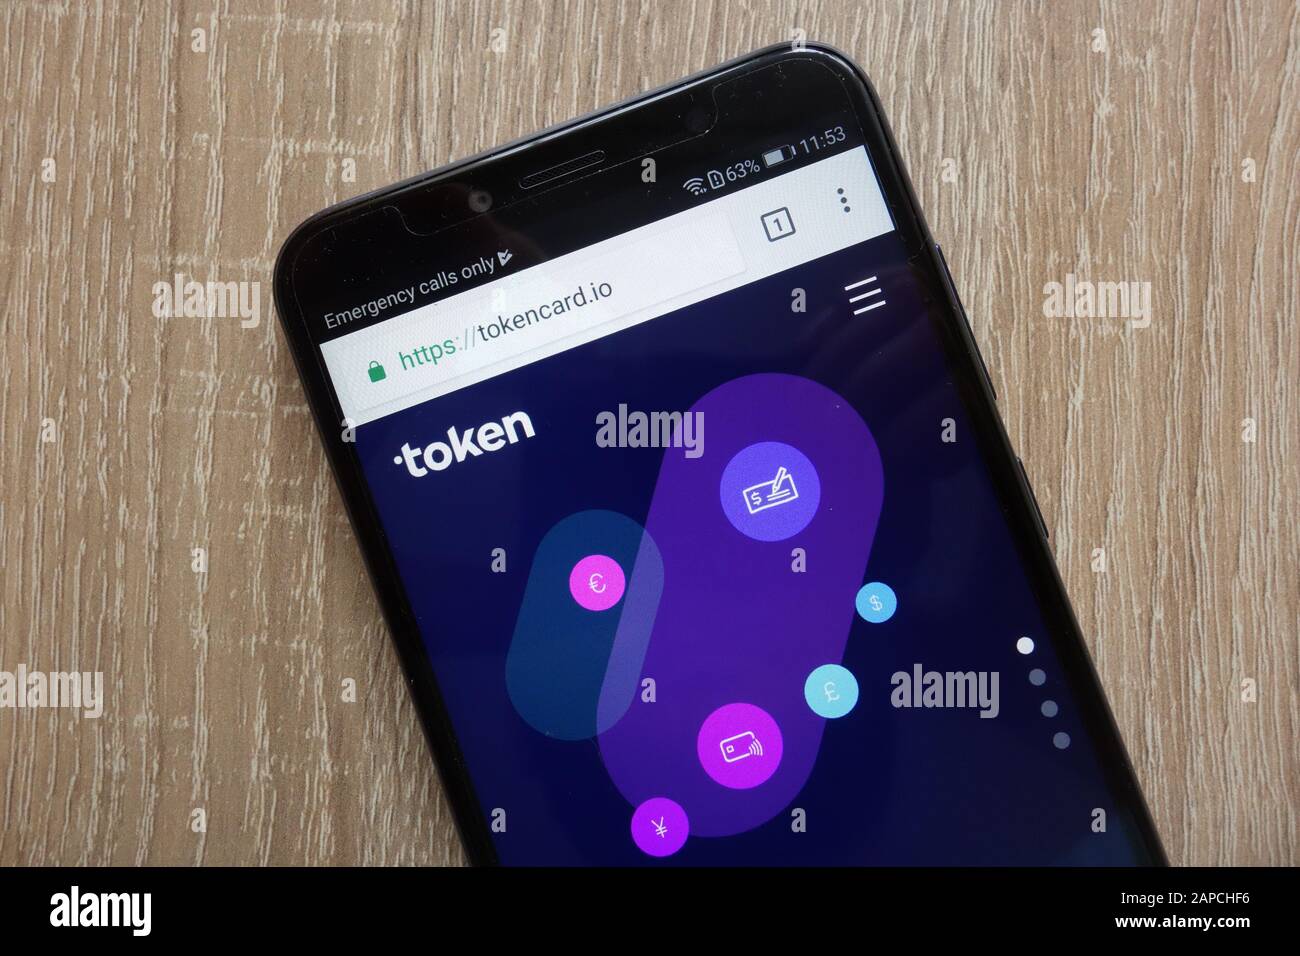 TokenCard (TKN) cryptocurrency website displayed on a modern smartphone Stock Photo